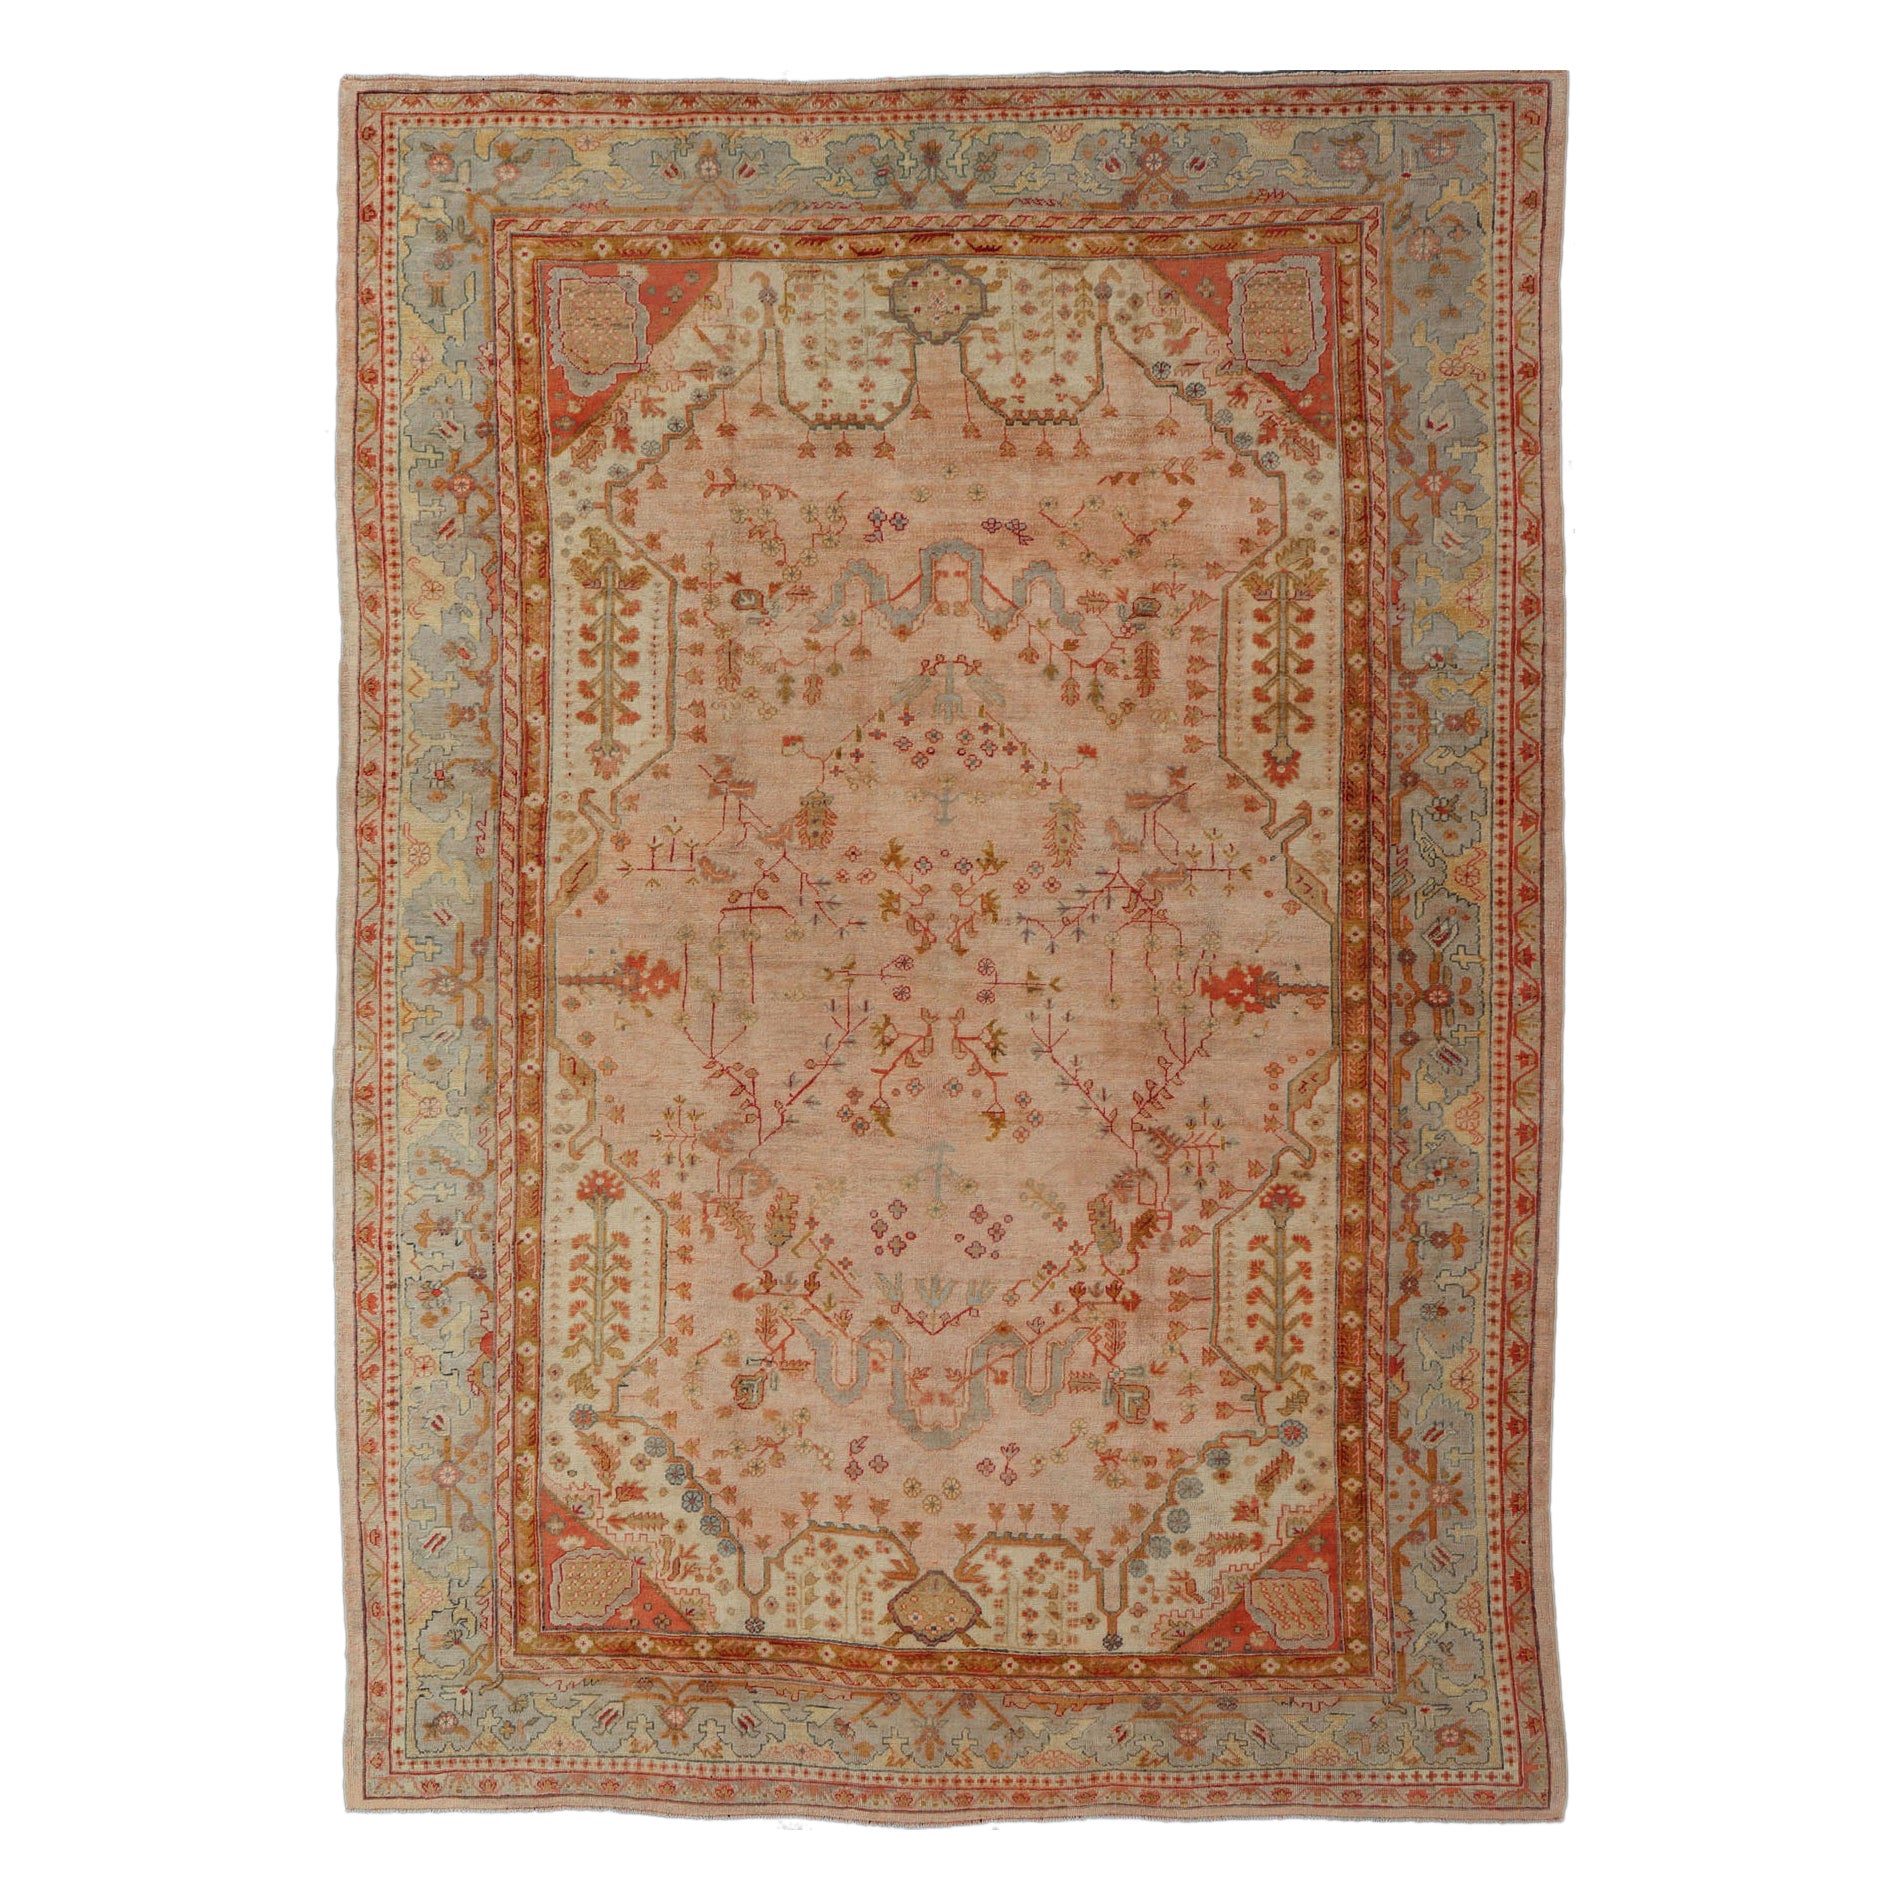 Antique Turkish Large Oushak Colorful Rug in Salmon, Green, Yellow, Orange For Sale